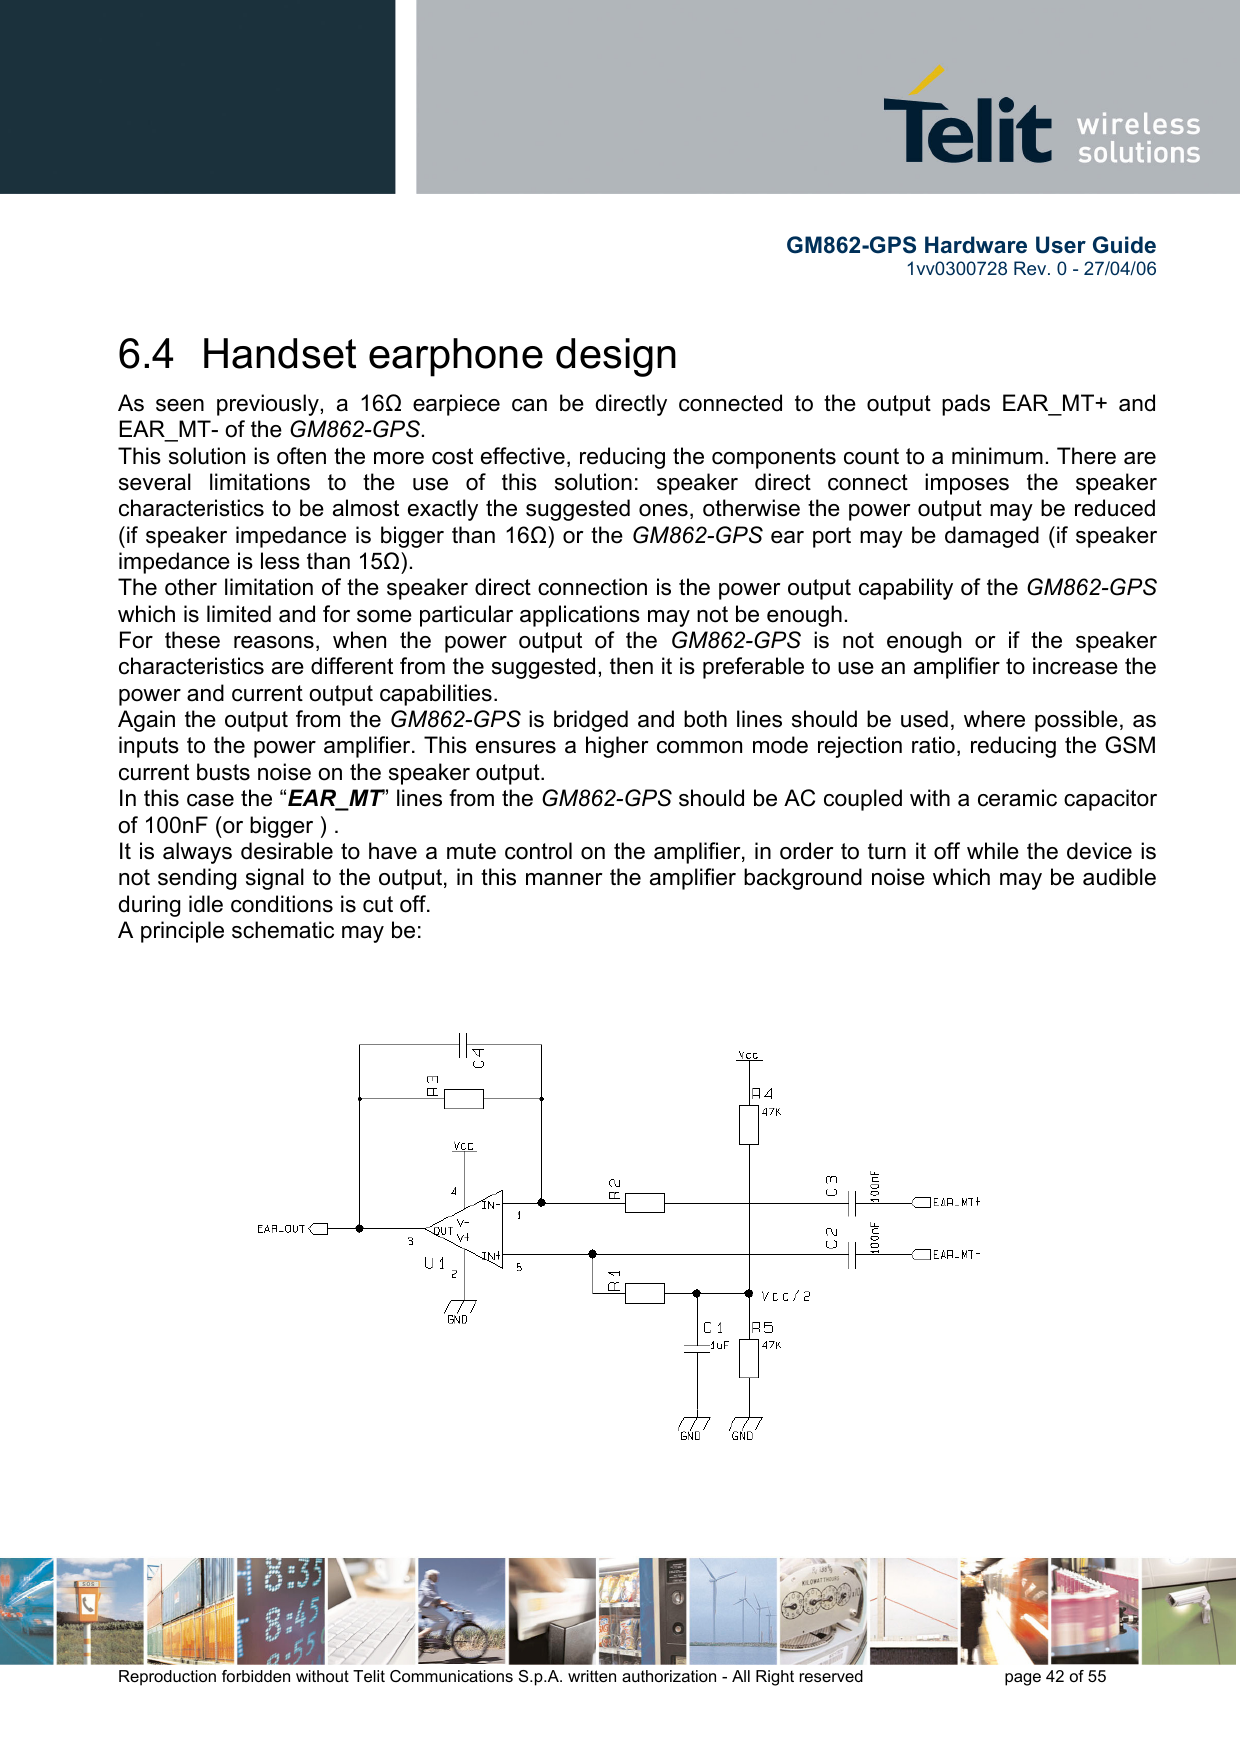        GM862-GPS Hardware User Guide   1vv0300728 Rev. 0 - 27/04/06    Reproduction forbidden without Telit Communications S.p.A. written authorization - All Right reserved    page 42 of 55  6.4  Handset earphone design As seen previously, a 16Ω earpiece can be directly connected to the output pads EAR_MT+ and EAR_MT- of the GM862-GPS. This solution is often the more cost effective, reducing the components count to a minimum. There are several limitations to the use of this solution: speaker direct connect imposes the speaker characteristics to be almost exactly the suggested ones, otherwise the power output may be reduced (if speaker impedance is bigger than 16Ω) or the GM862-GPS ear port may be damaged (if speaker impedance is less than 15Ω). The other limitation of the speaker direct connection is the power output capability of the GM862-GPS  which is limited and for some particular applications may not be enough. For these reasons, when the power output of the GM862-GPS is not enough or if the speaker characteristics are different from the suggested, then it is preferable to use an amplifier to increase the power and current output capabilities.  Again the output from the GM862-GPS is bridged and both lines should be used, where possible, as inputs to the power amplifier. This ensures a higher common mode rejection ratio, reducing the GSM current busts noise on the speaker output. In this case the “EAR_MT” lines from the GM862-GPS should be AC coupled with a ceramic capacitor of 100nF (or bigger ) . It is always desirable to have a mute control on the amplifier, in order to turn it off while the device is not sending signal to the output, in this manner the amplifier background noise which may be audible during idle conditions is cut off. A principle schematic may be:  